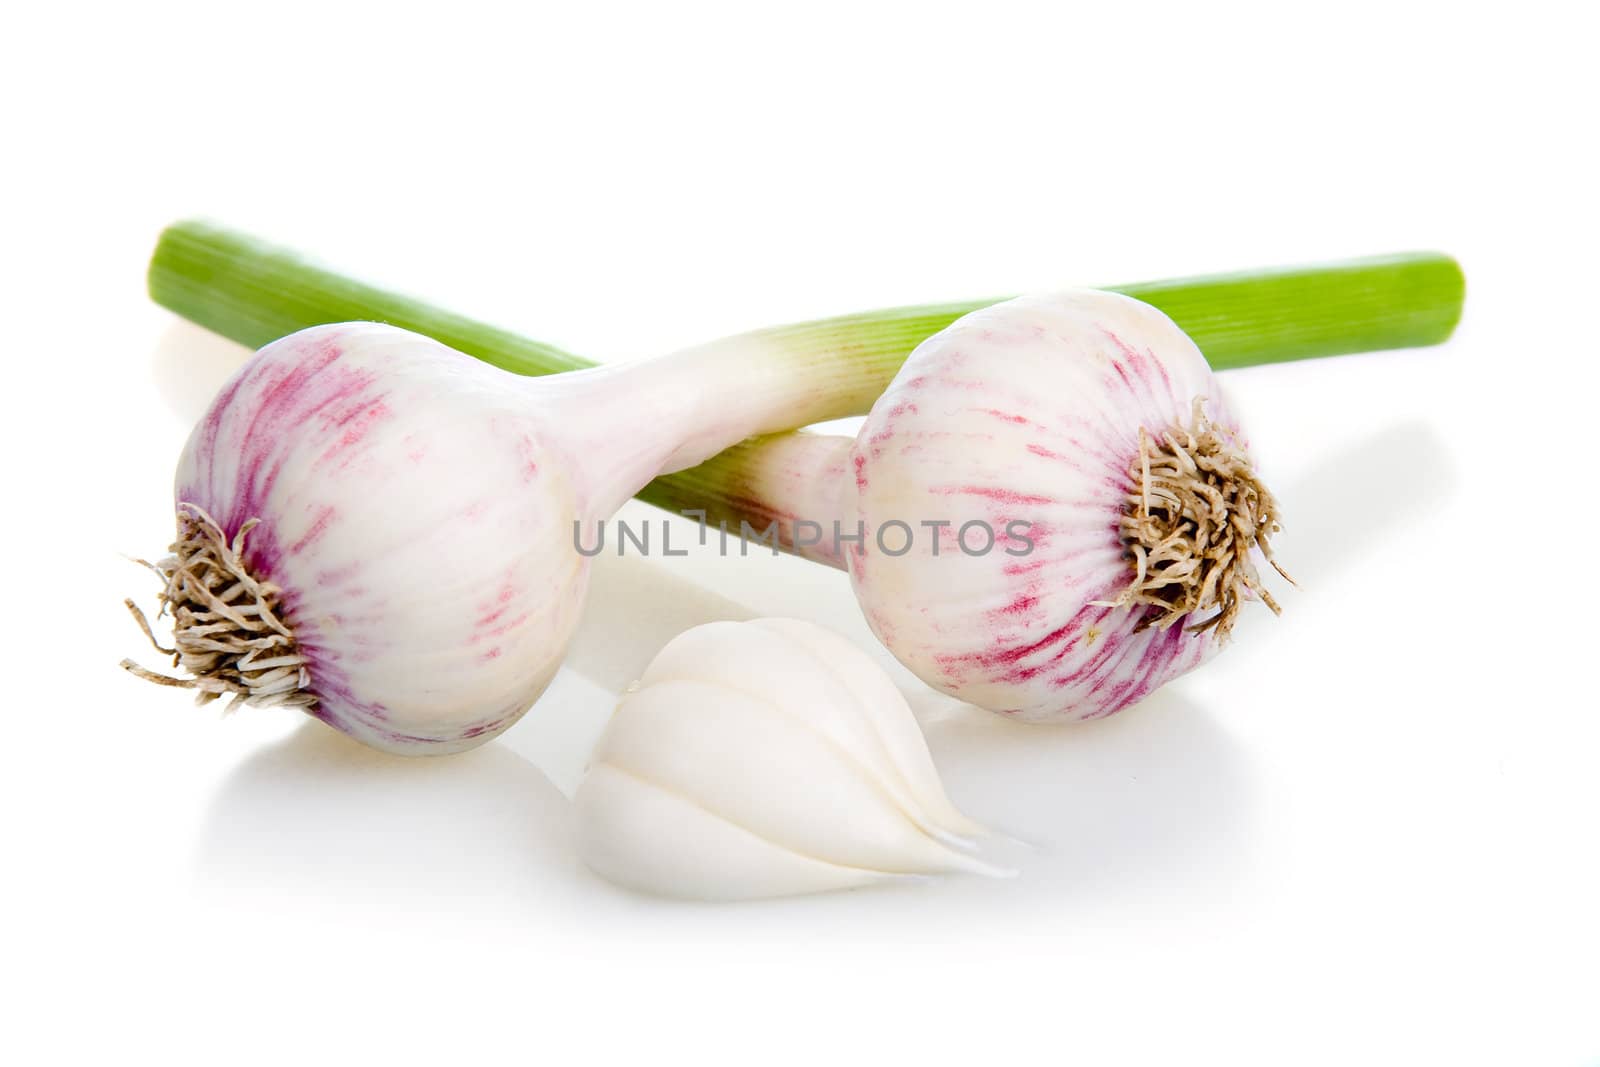 Garlic Vegetable and Cloves Isolated on White by alphacell